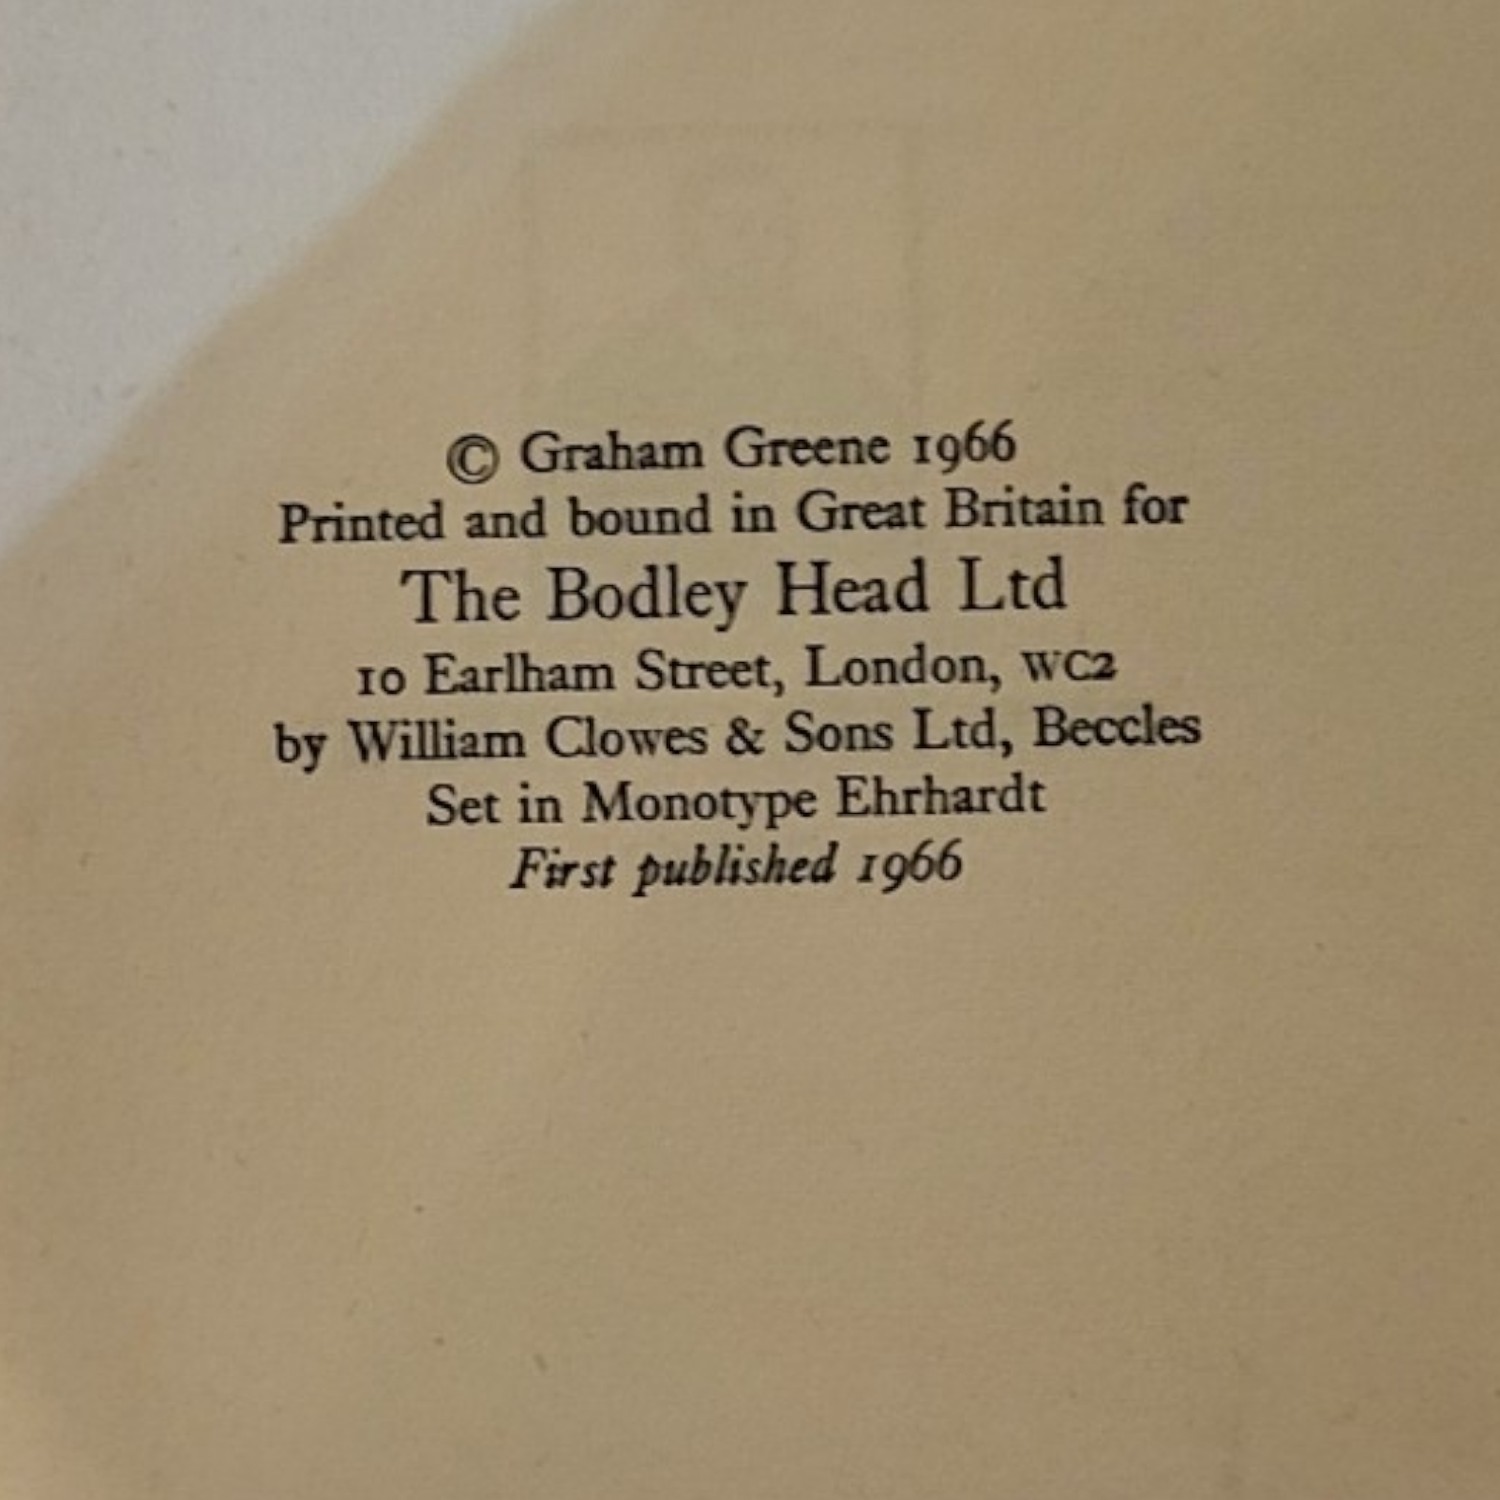 GRAHAM GREENE, THE COMEDIANS, DUST JACKET BY IVAN LAPPER First published for The Bodley Head Ltd, by - Image 8 of 9